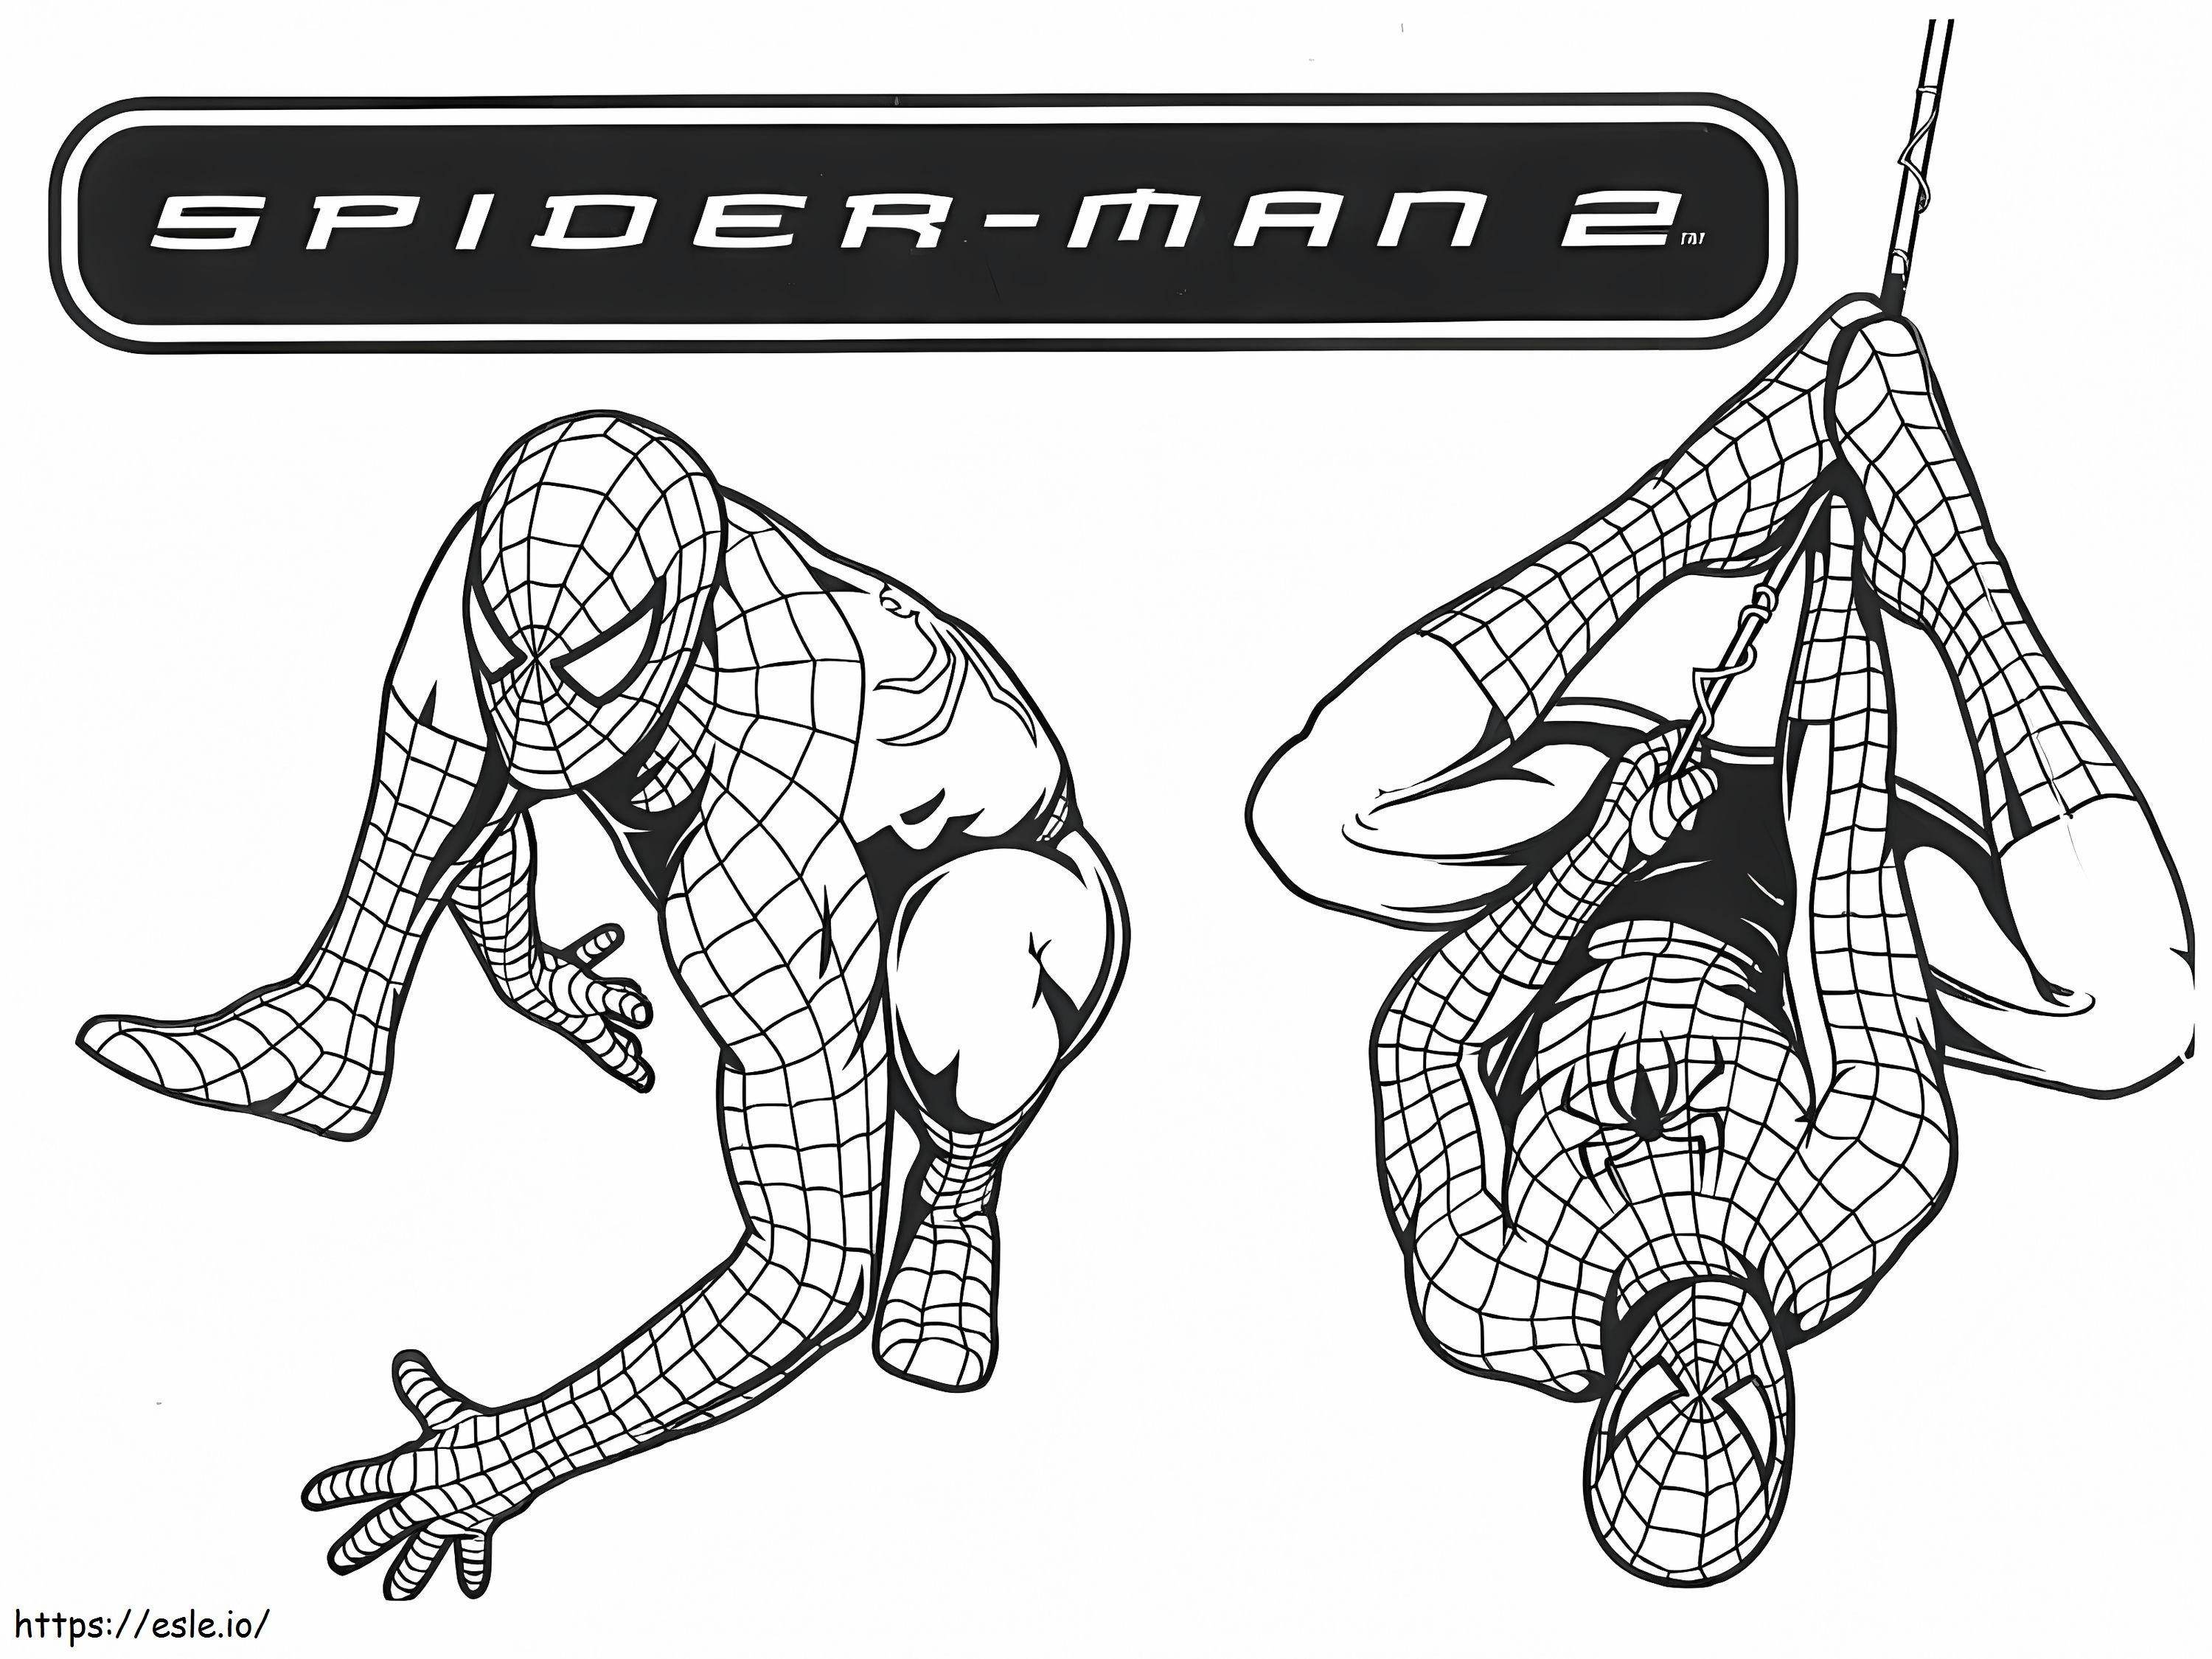 Spiderman 3 coloring page